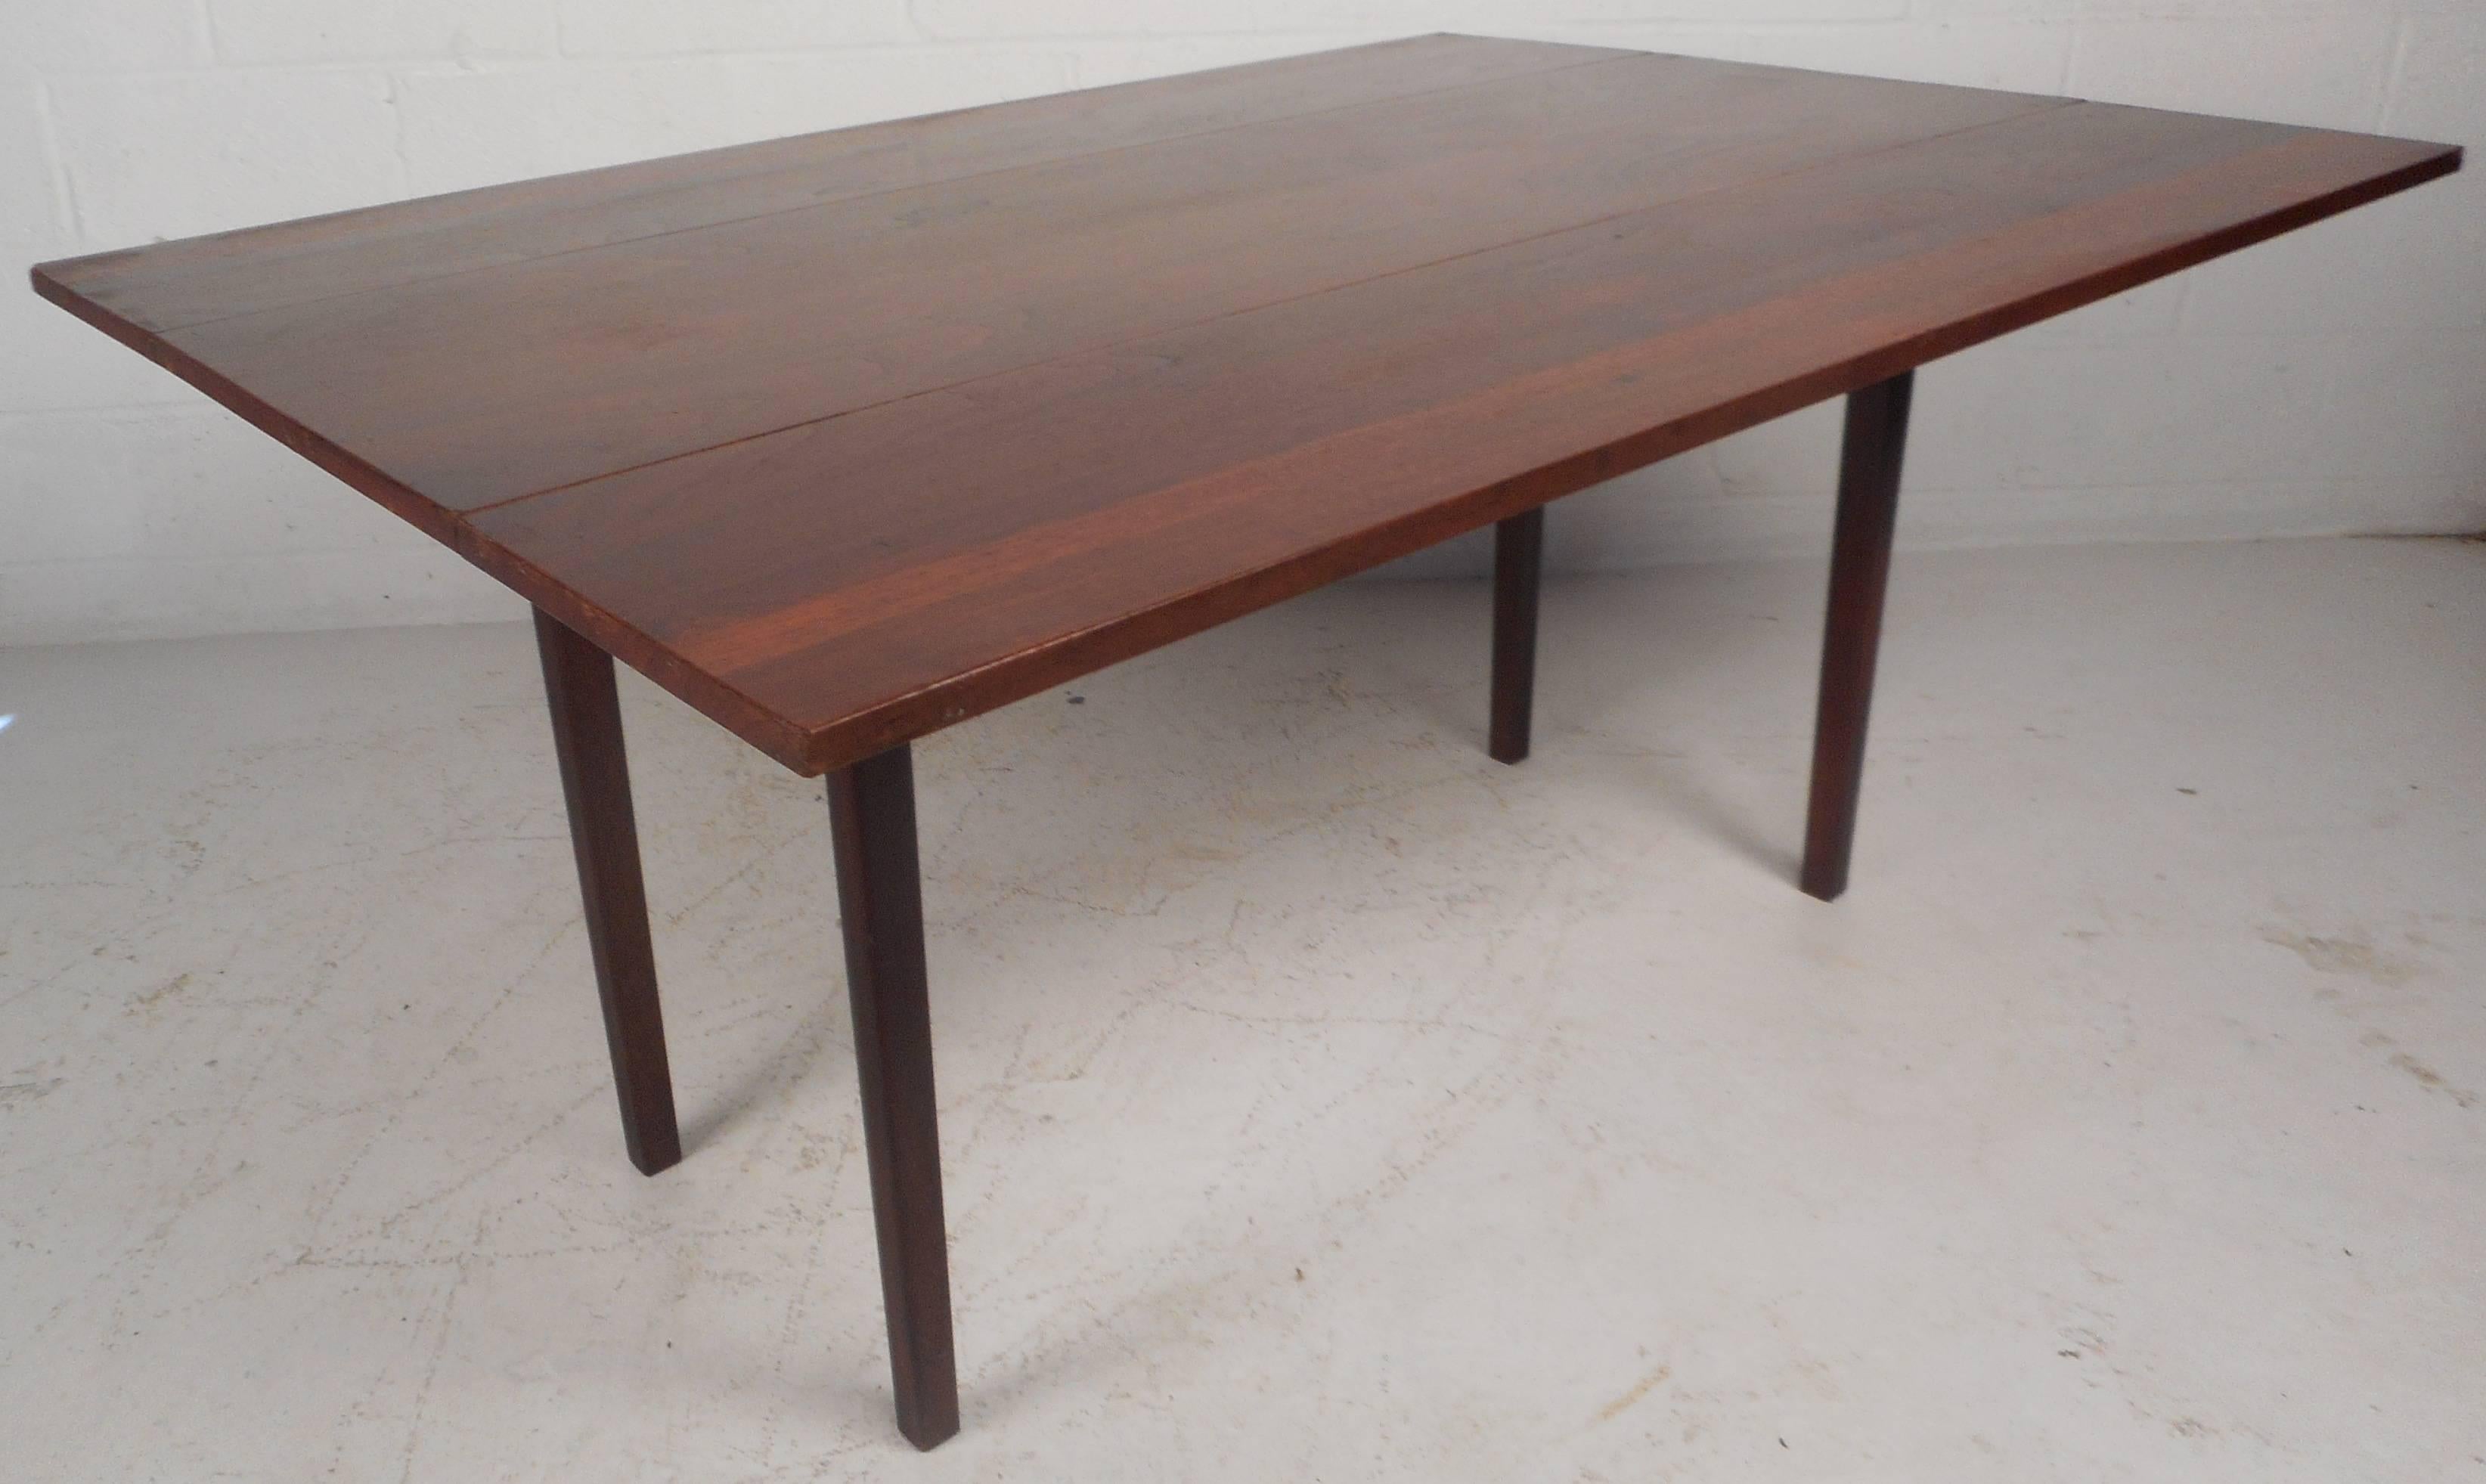 This elegant vintage modern dining table conveniently goes from 18.25